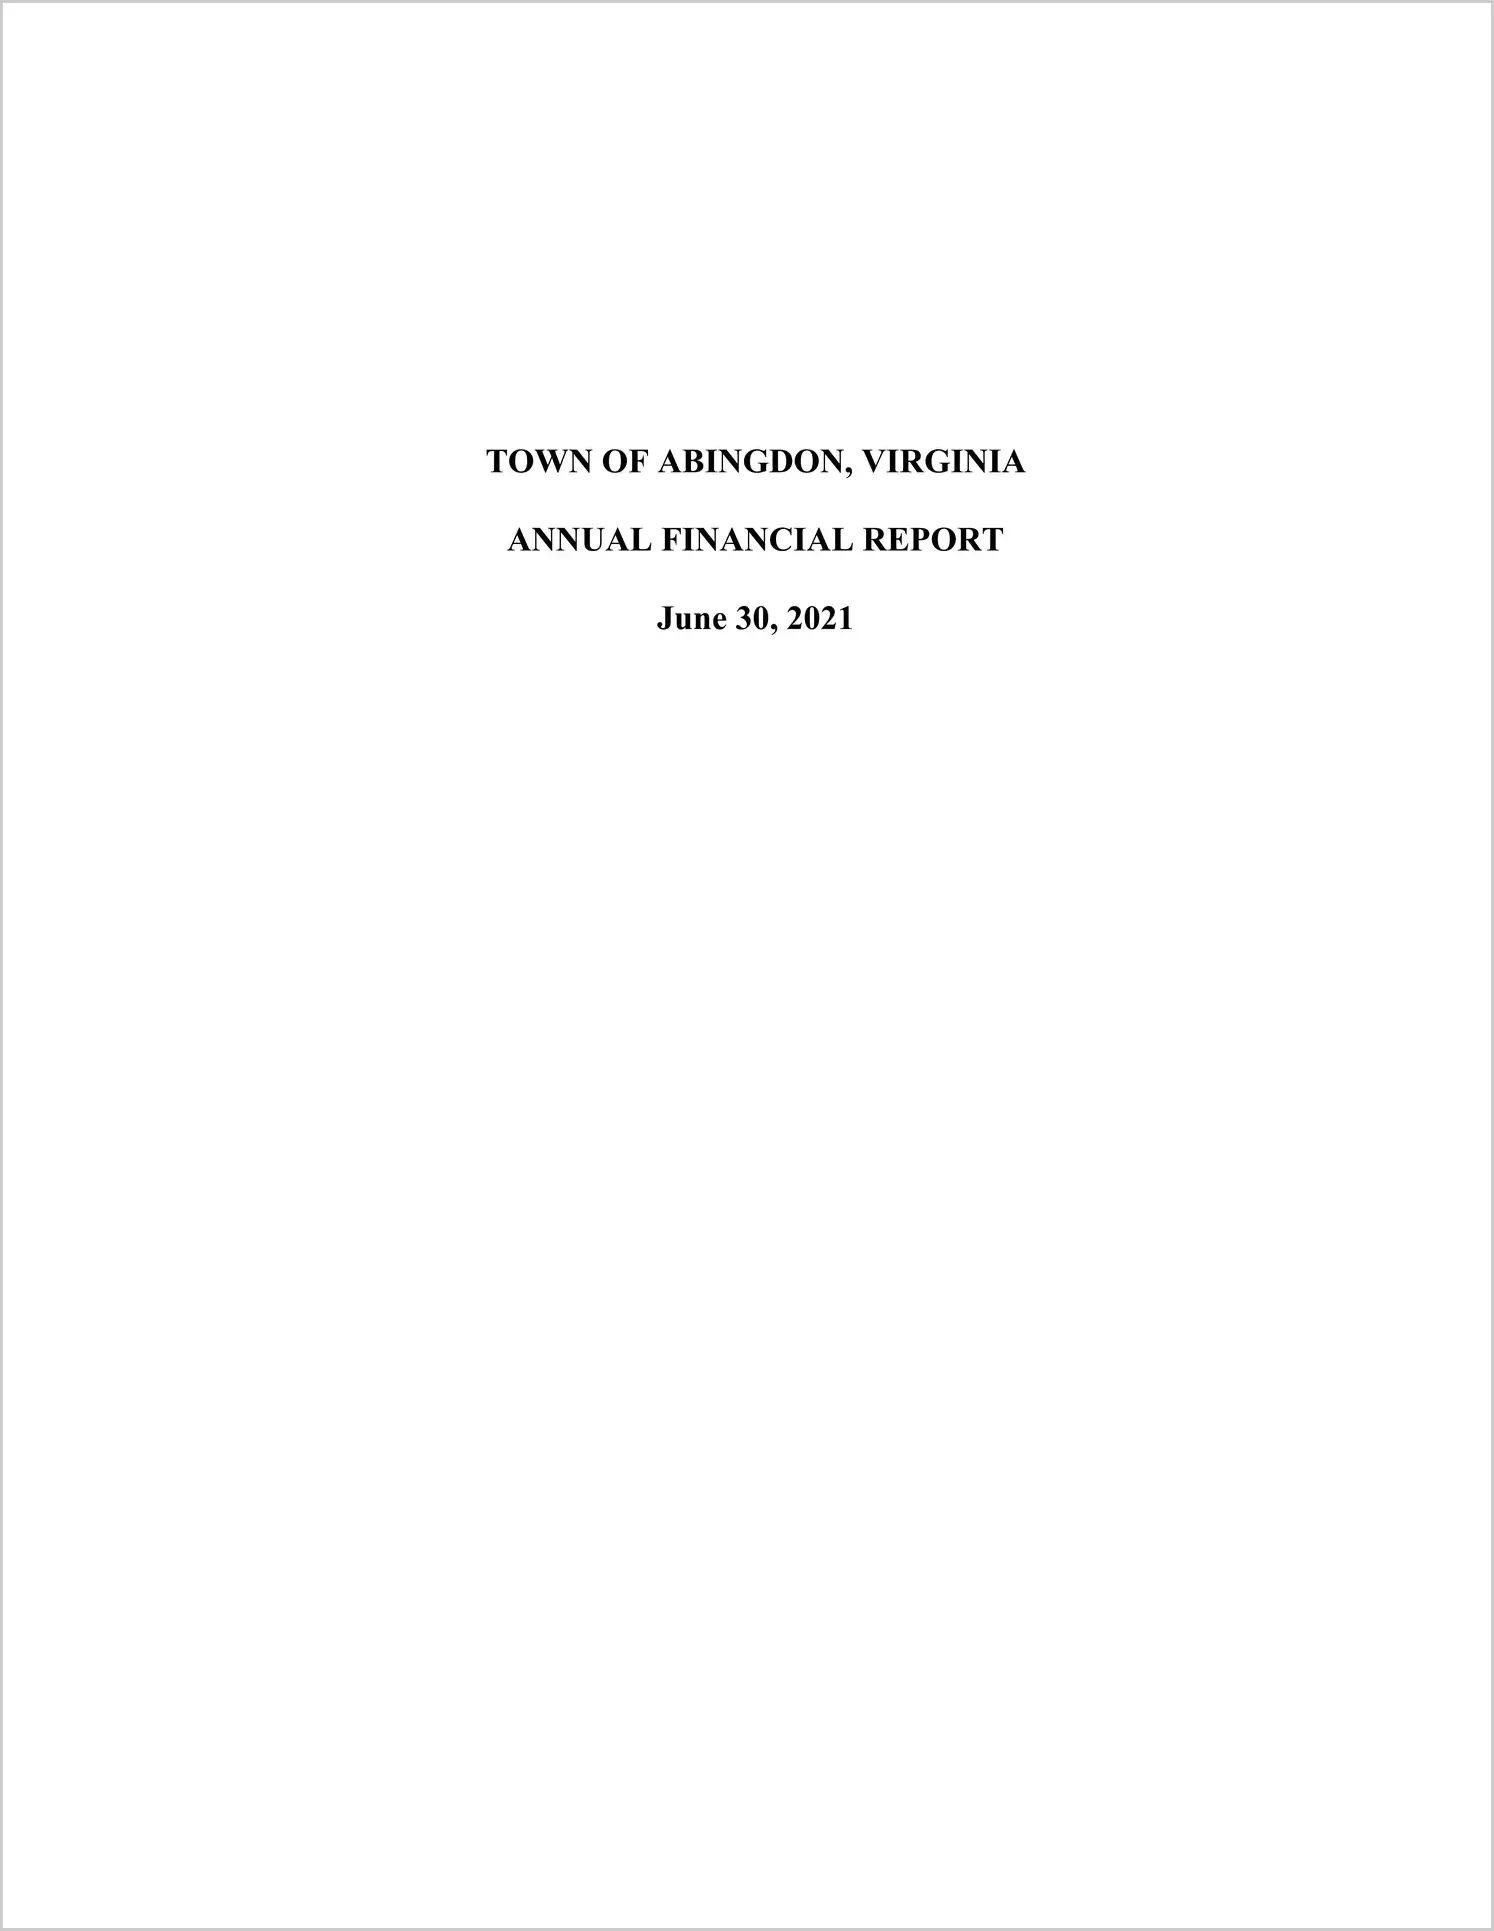 2021 Annual Financial Report for Town of Abingdon